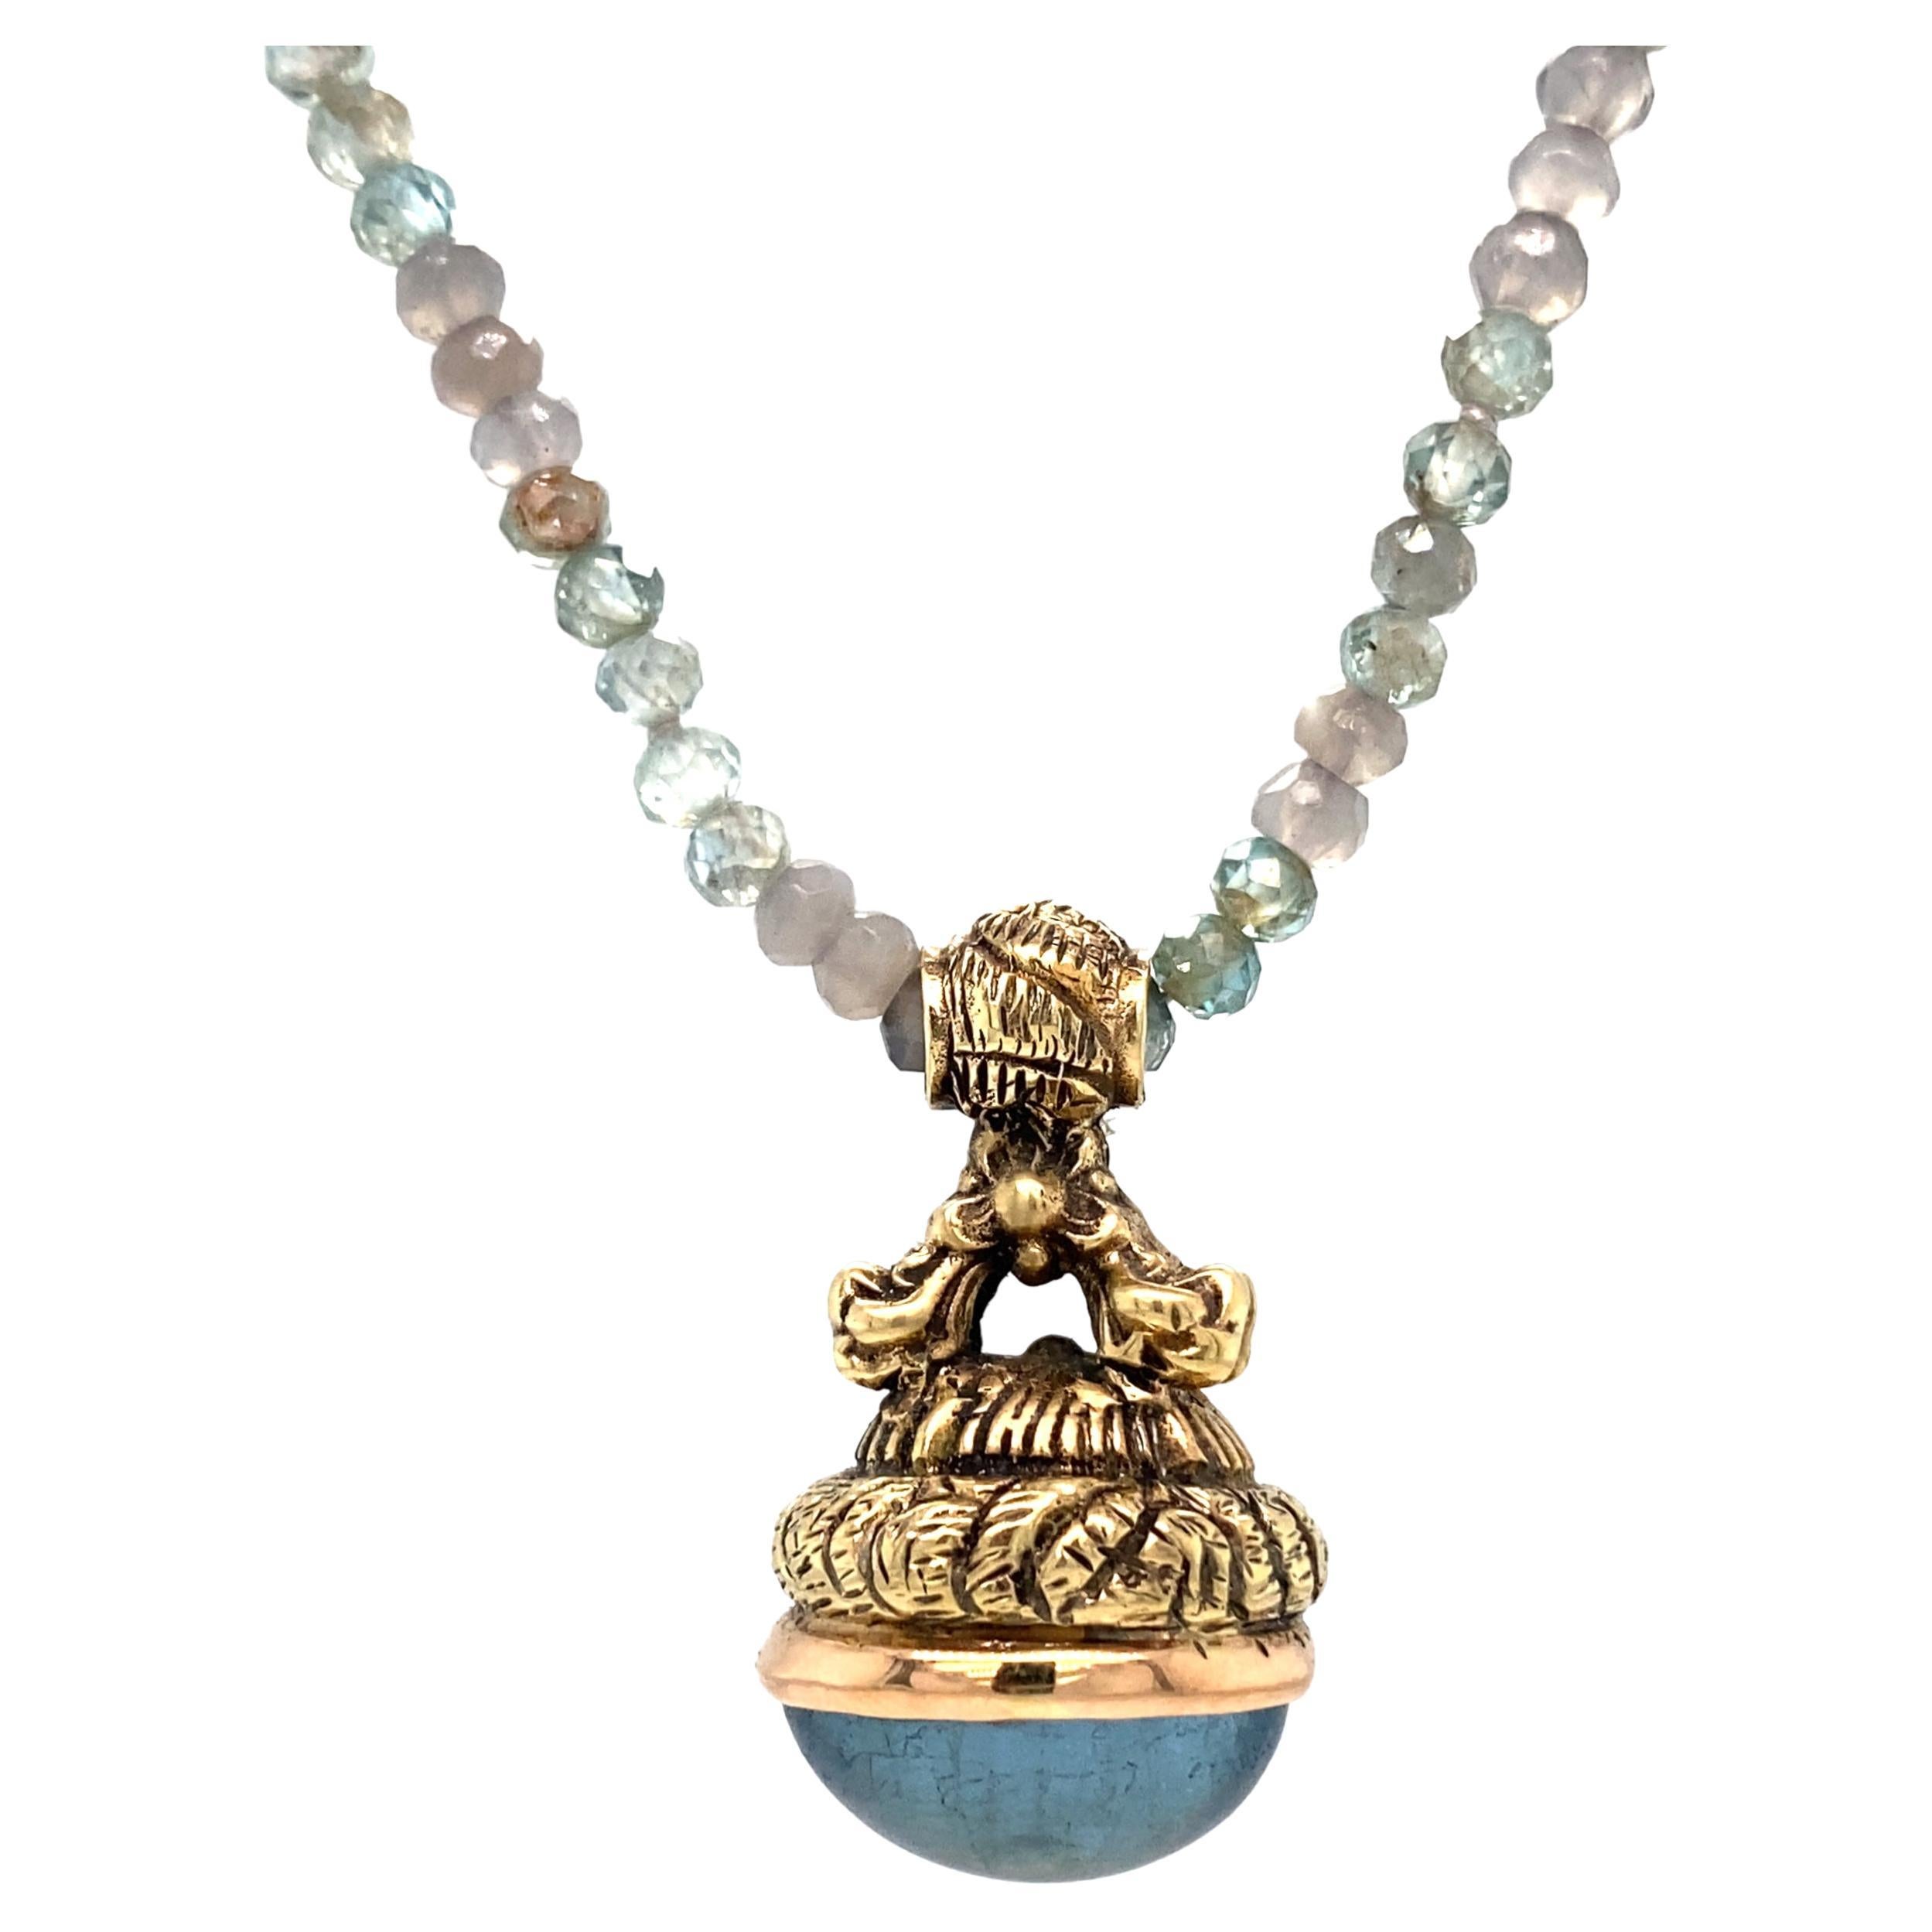 "Seal" Gold Fob with 11 Carat Aquamarine Cabochon on Zircon & Moonstone Chain For Sale